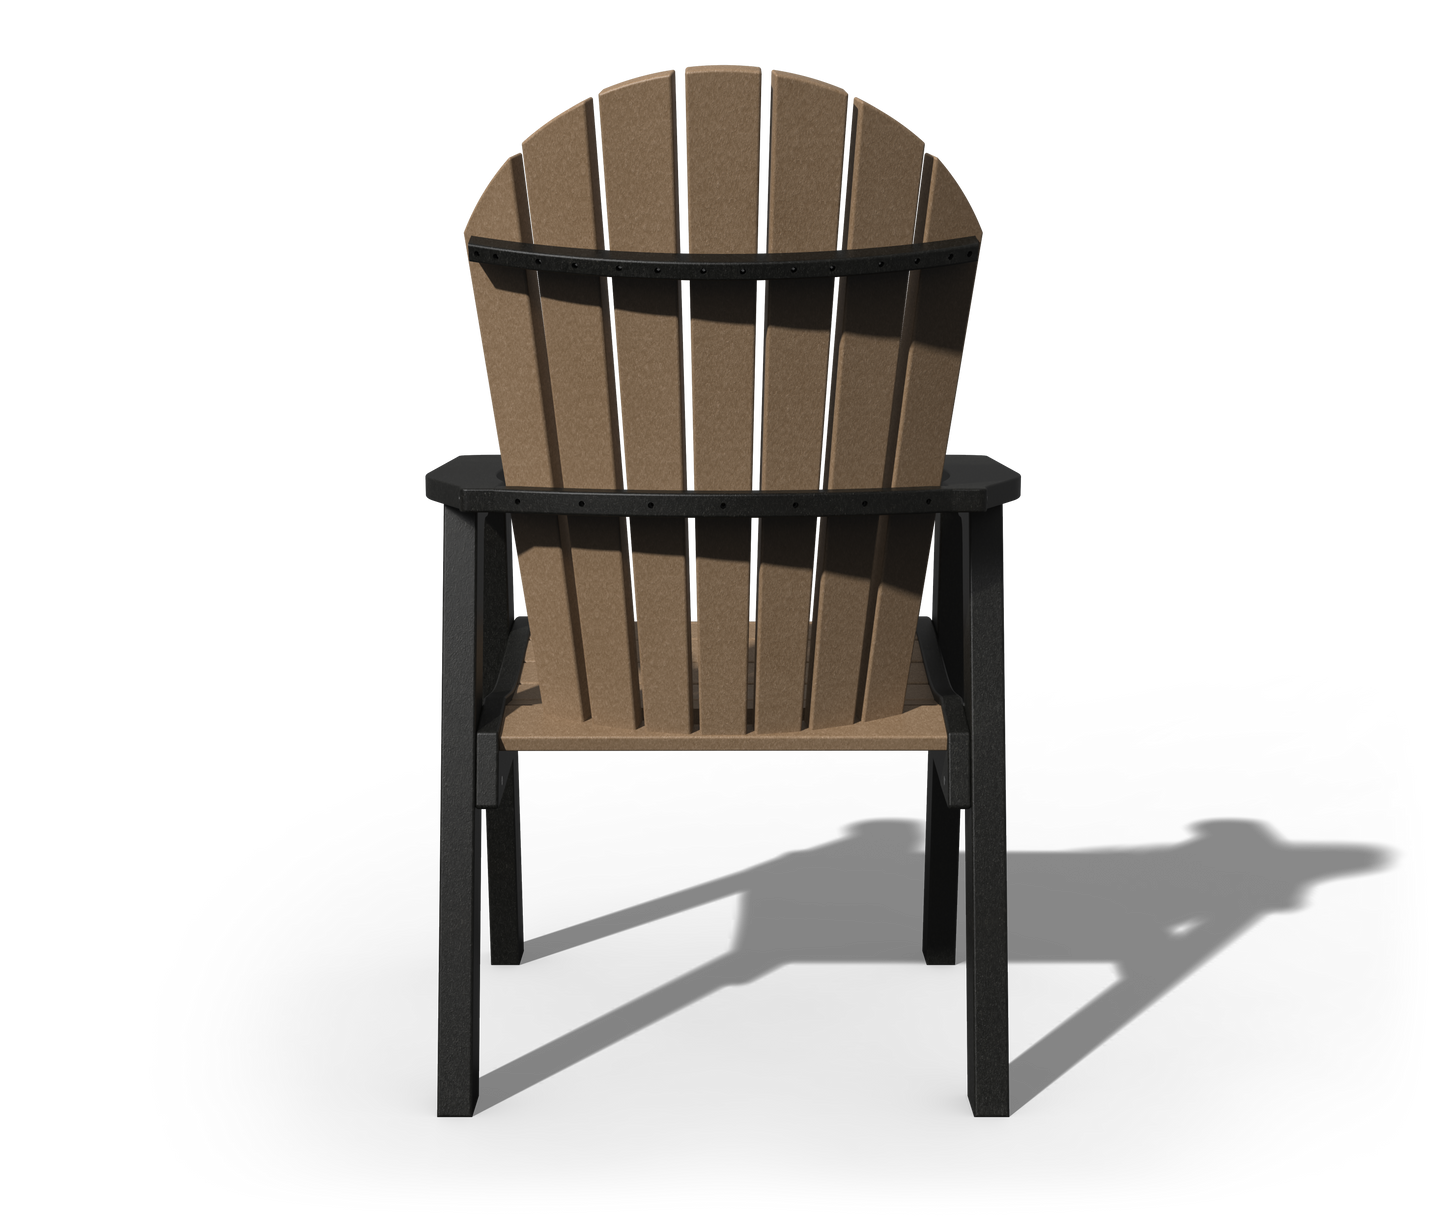 Patiova Recycled Plastic Amish Crafted Adirondack Dining Chair - LEAD TIME TO SHIP 3 WEEKS